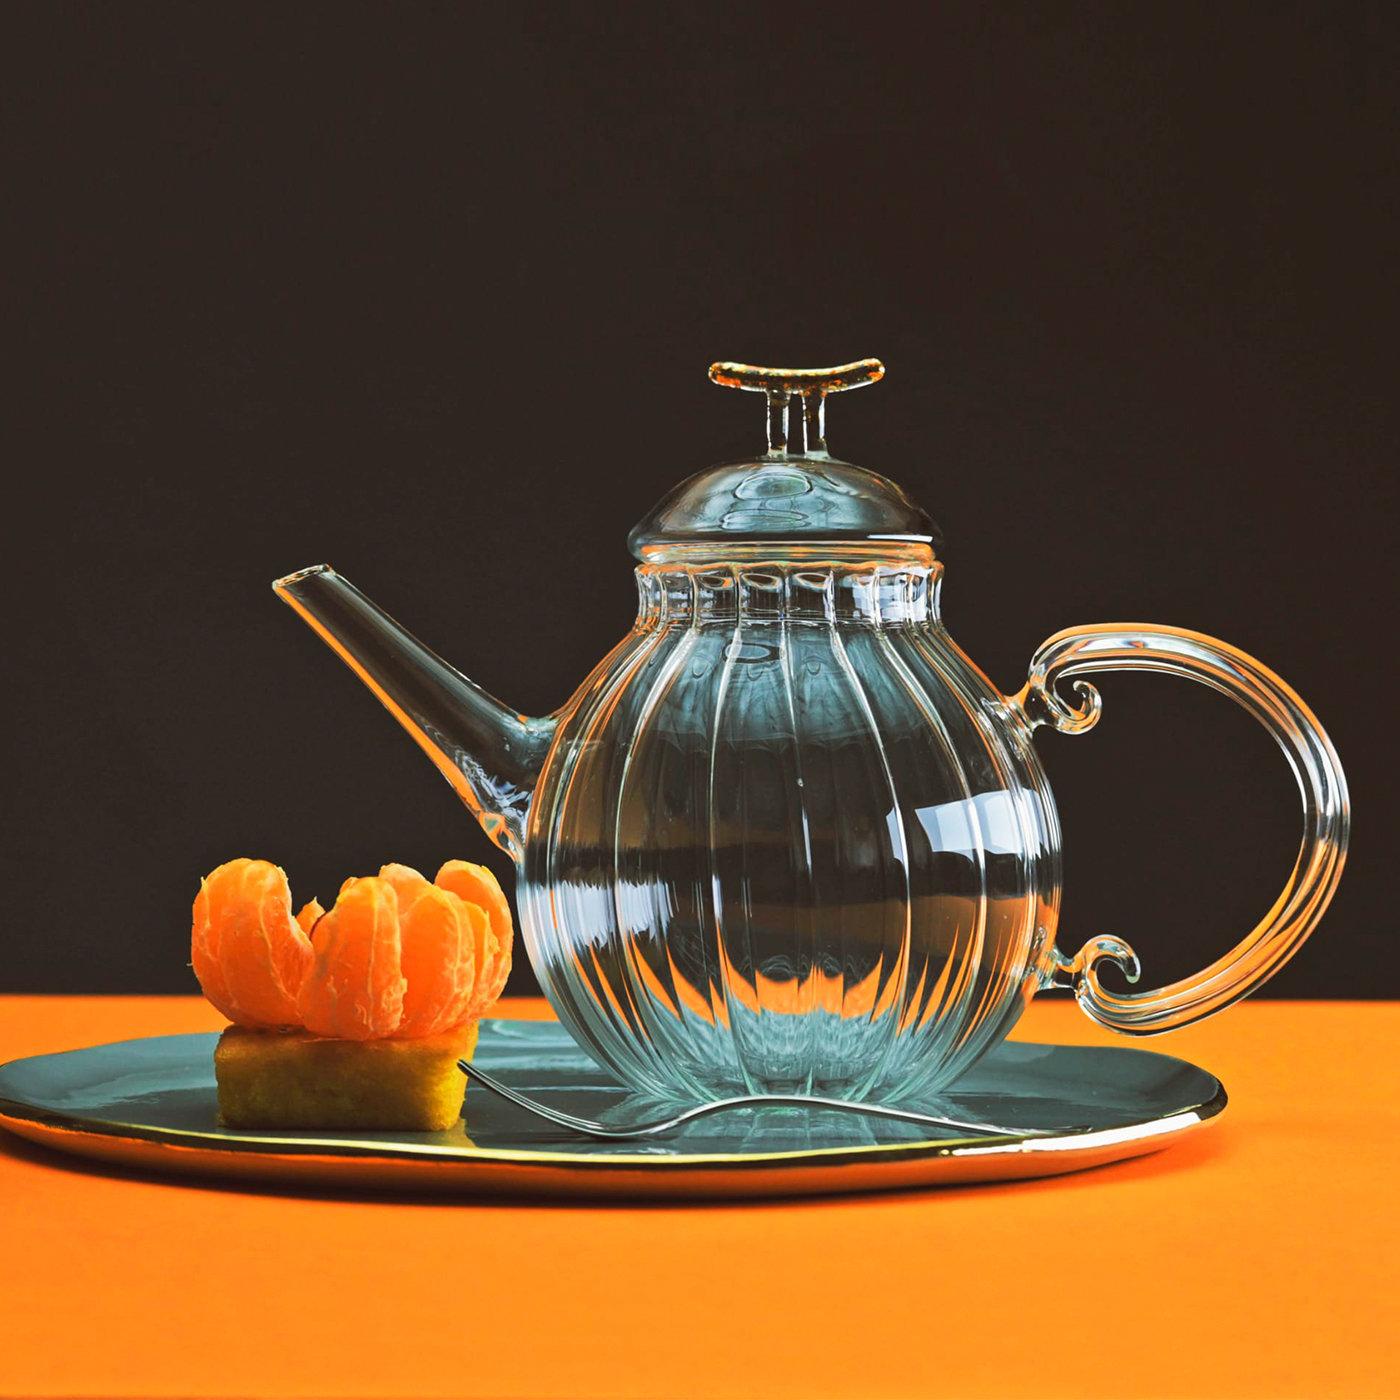 Crafted entirely by hand of mouth-blown transparent glass, this elegant teapot boasts a striking texture of parallel lines that run vertically on its curvaceous body, accentuating its sinuous shape. Comprising also a small spout and a handle, this